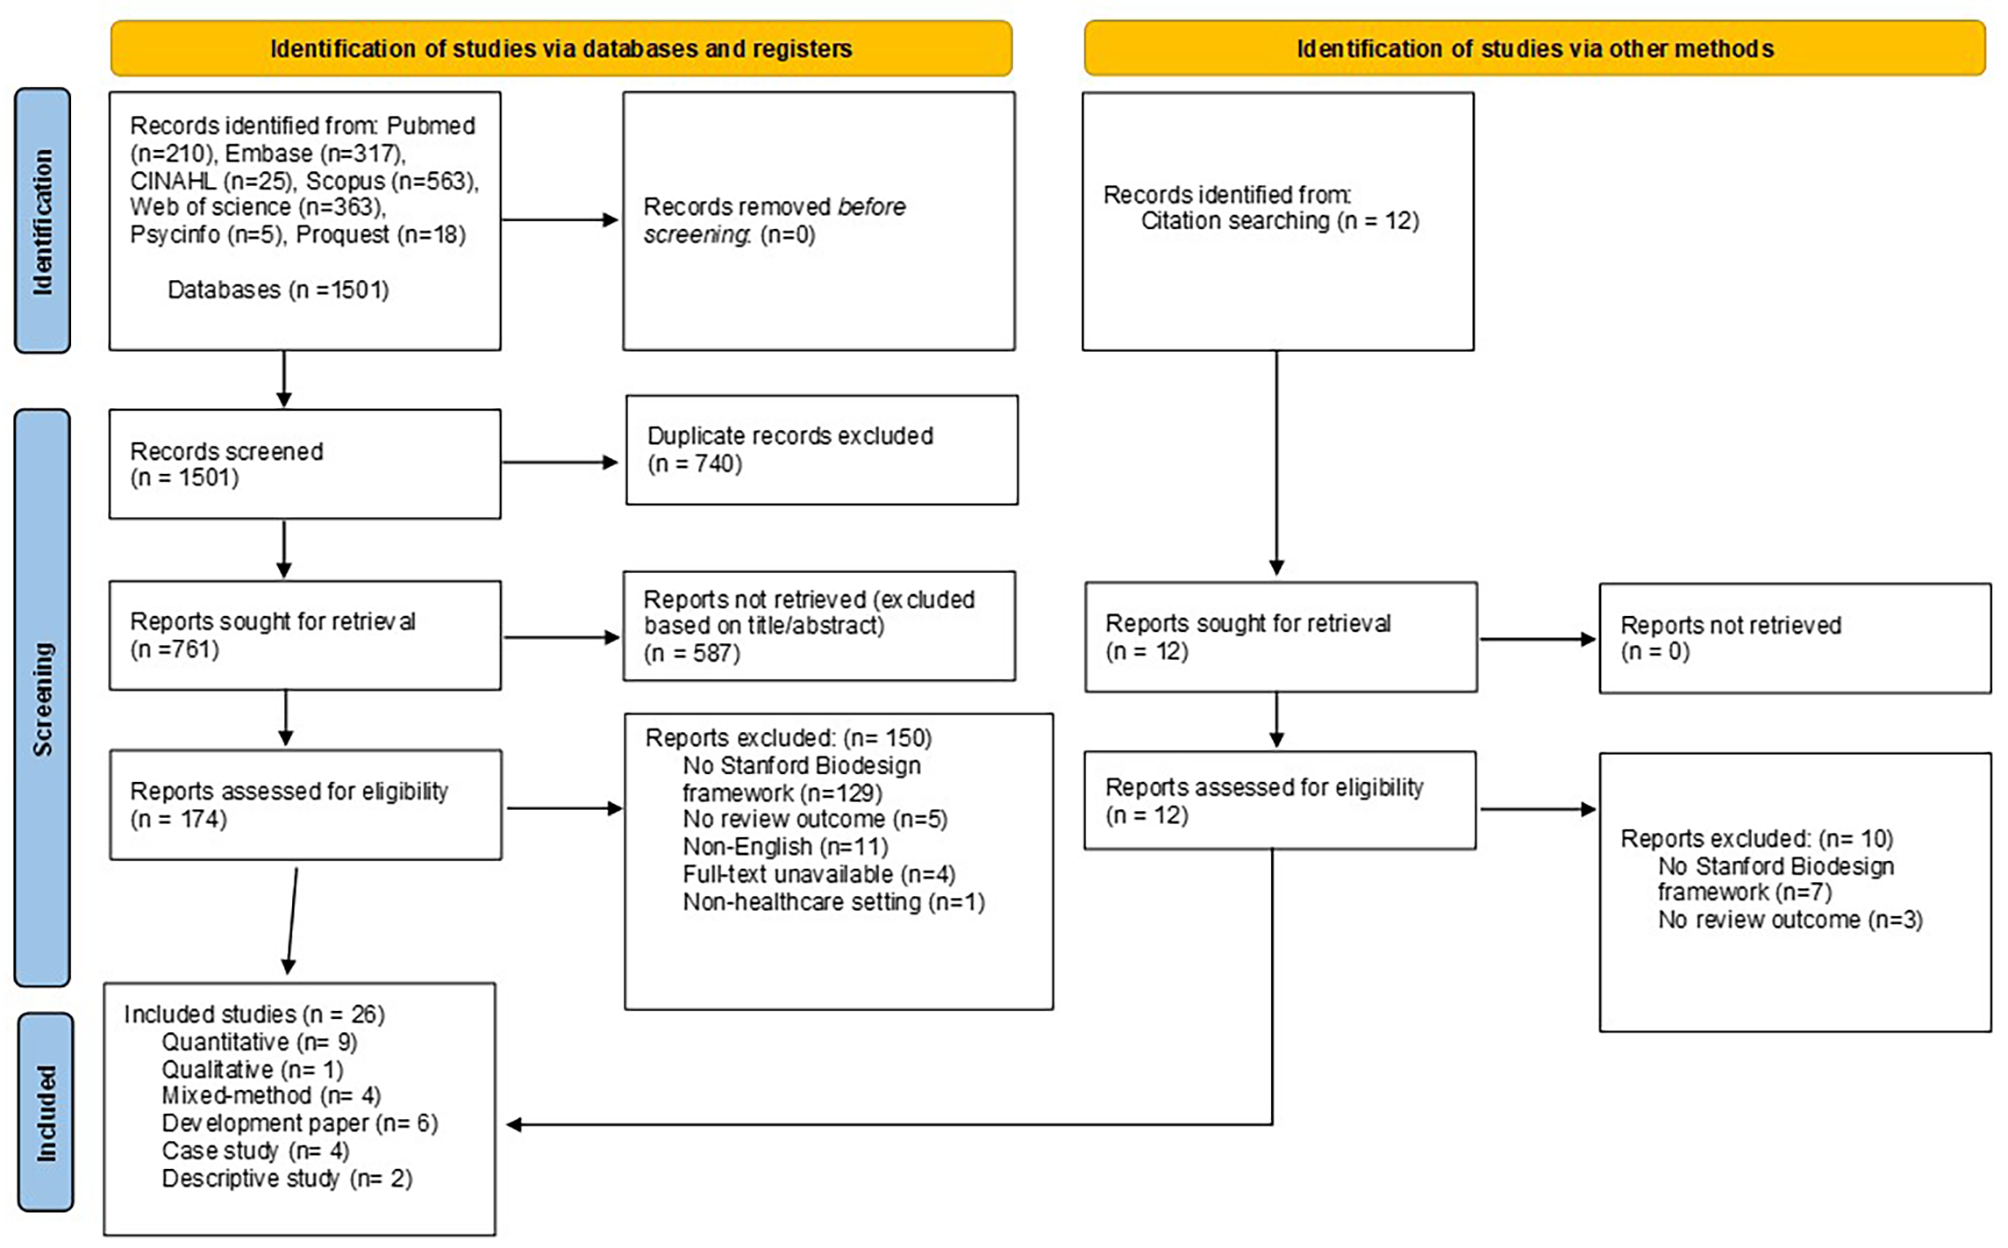 Application of the Stanford Biodesign Framework in Healthcare Innovation Training and Commercialization of Market Appropriate Products: A Scoping Review